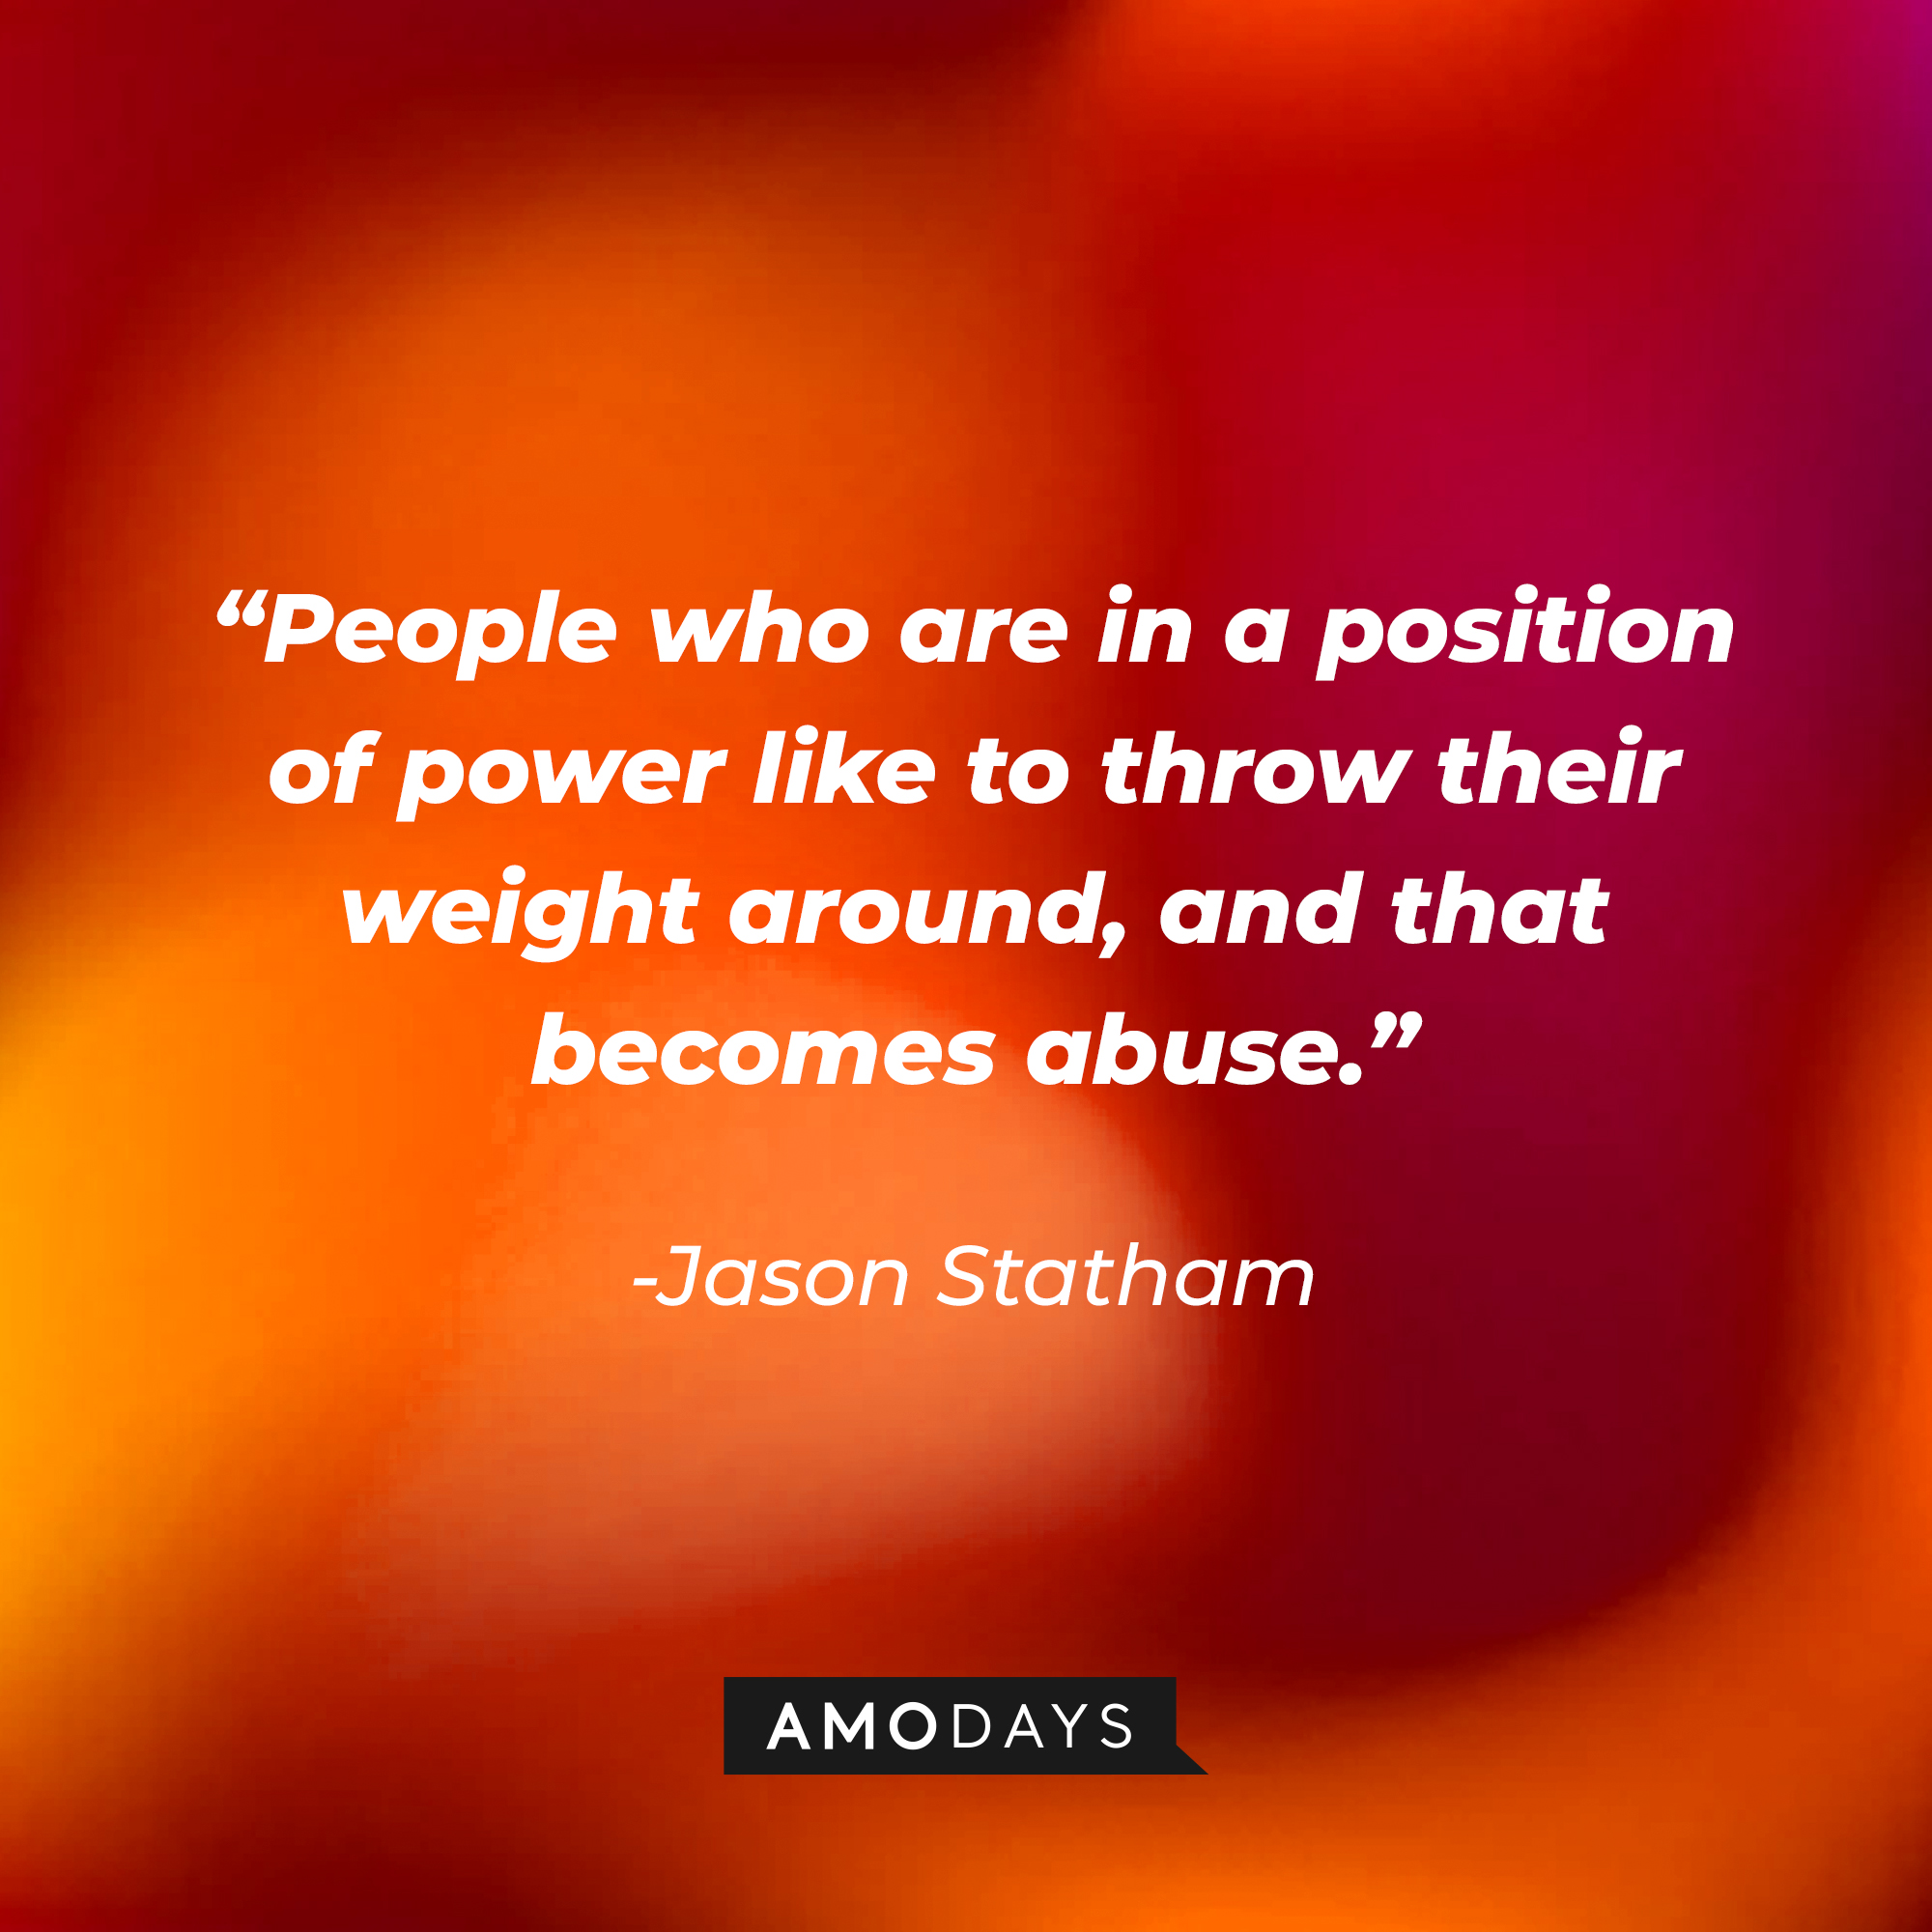 Jason Statham's quote: “People who are in a position of power like to throw their weight around, and that becomes abuse.” | Source: Amodays